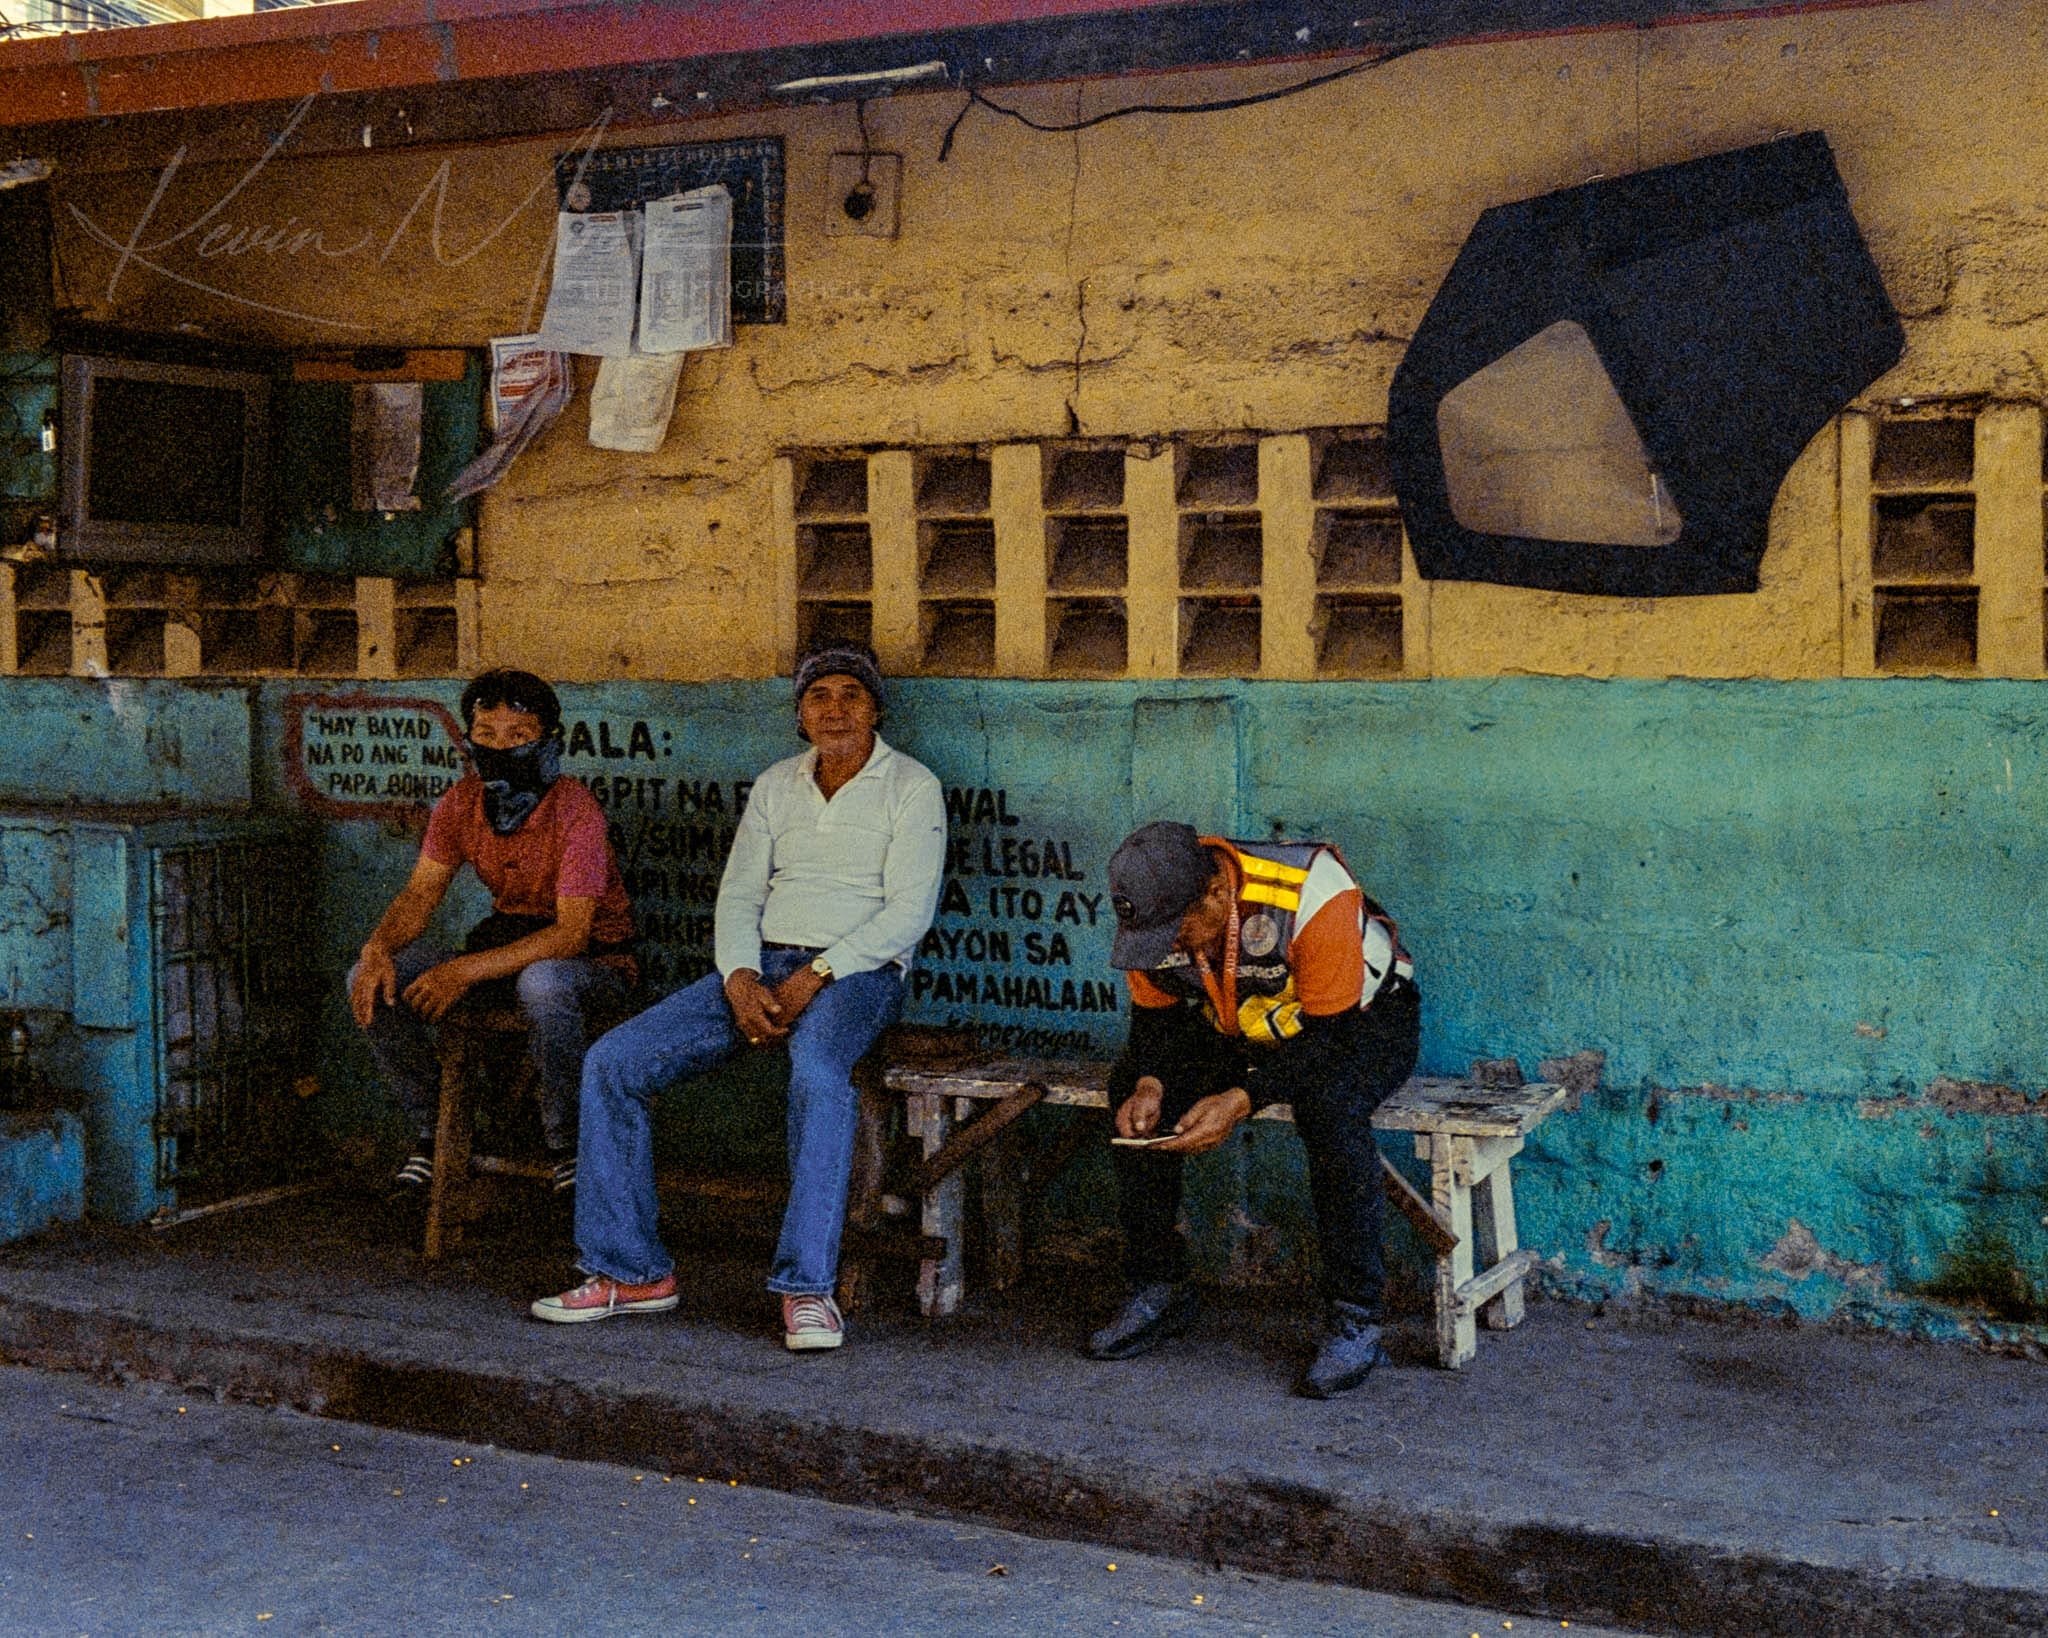 Locals enjoying downtime on makeshift benches in a vibrant, urban community setting.